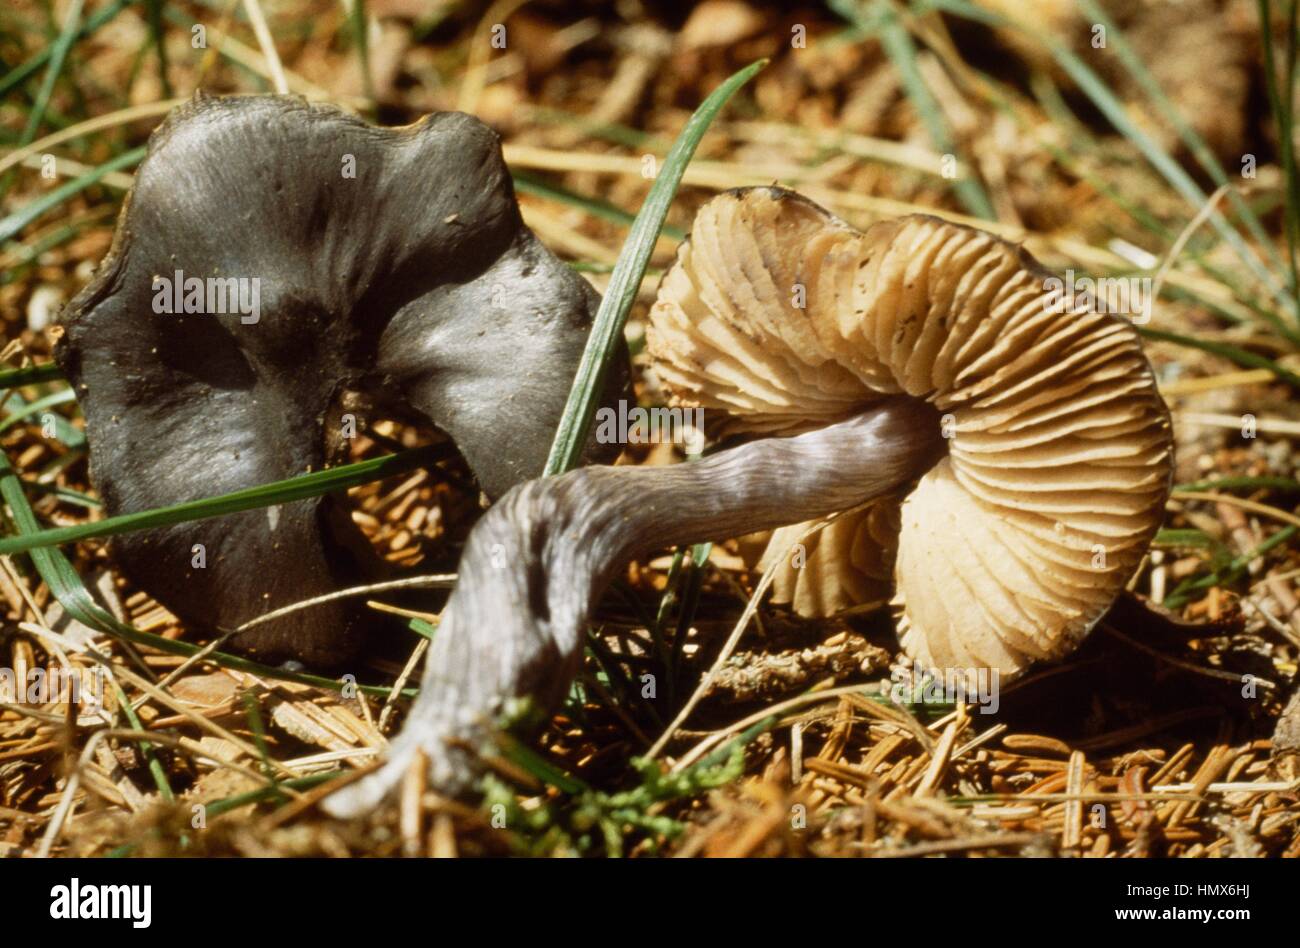 Entoloma nitidum fungus with the colours of the cap and stem contrasted with the lamellars. Stock Photo